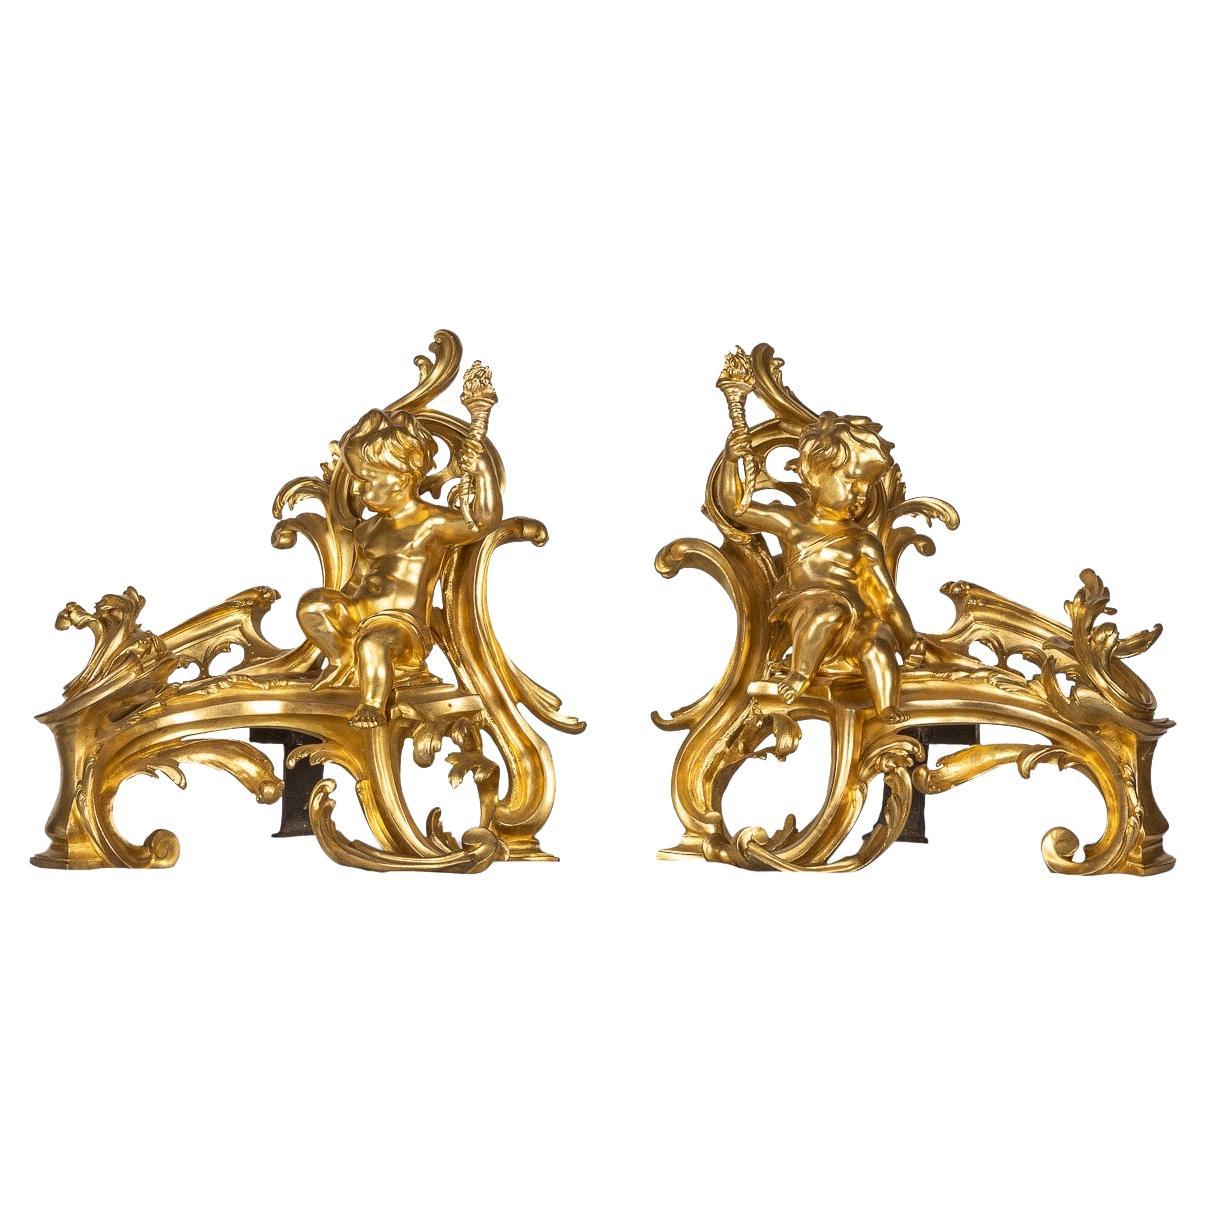 19th Century French Pair of Ormolu Bronze Fireplace Chenets, C.1850